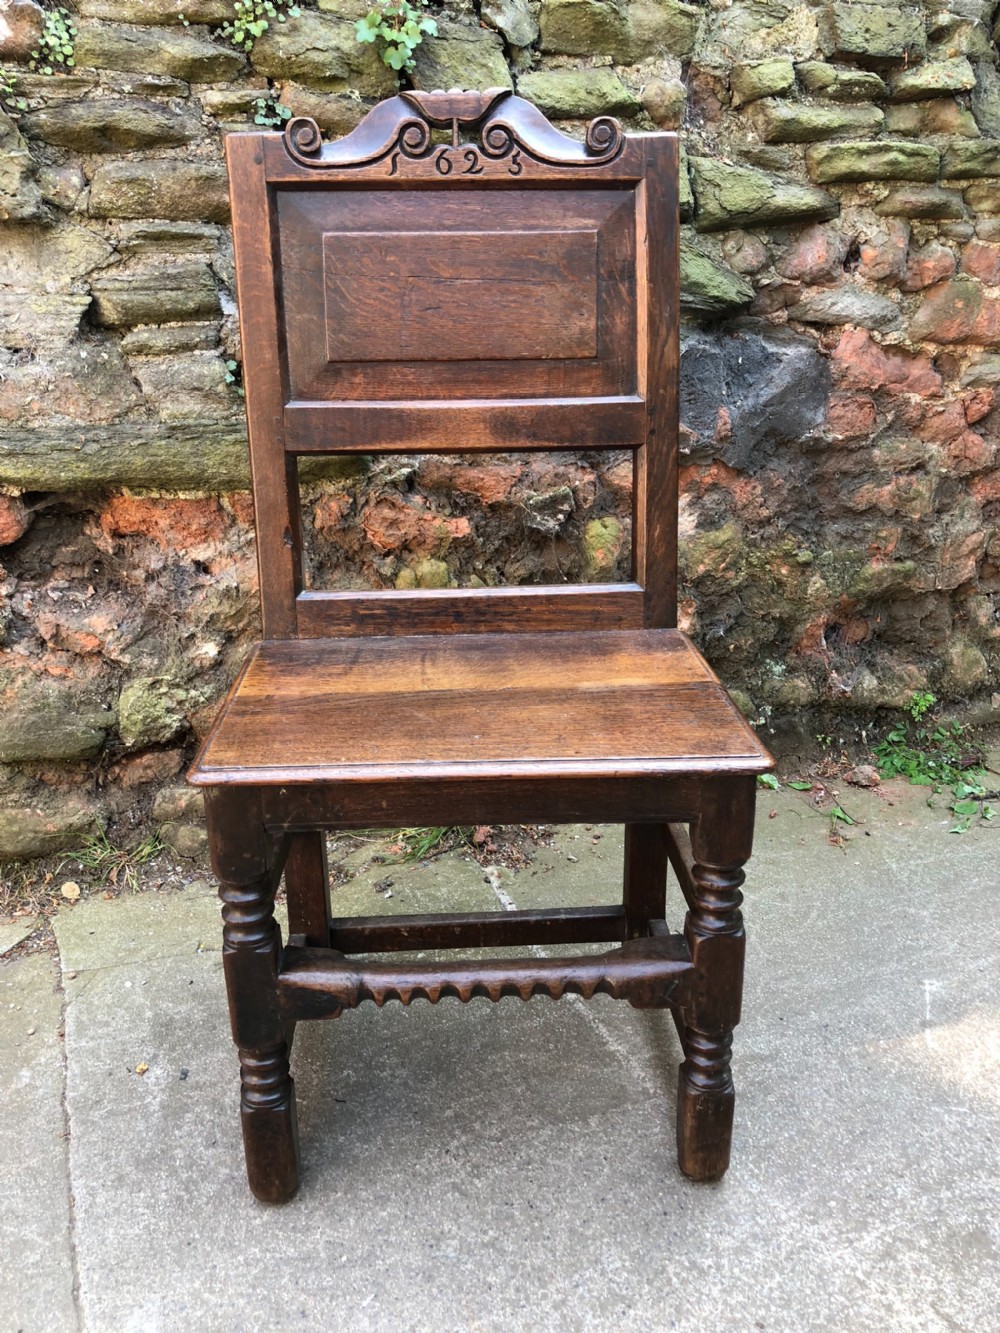 c17th oak chair with later date 1625